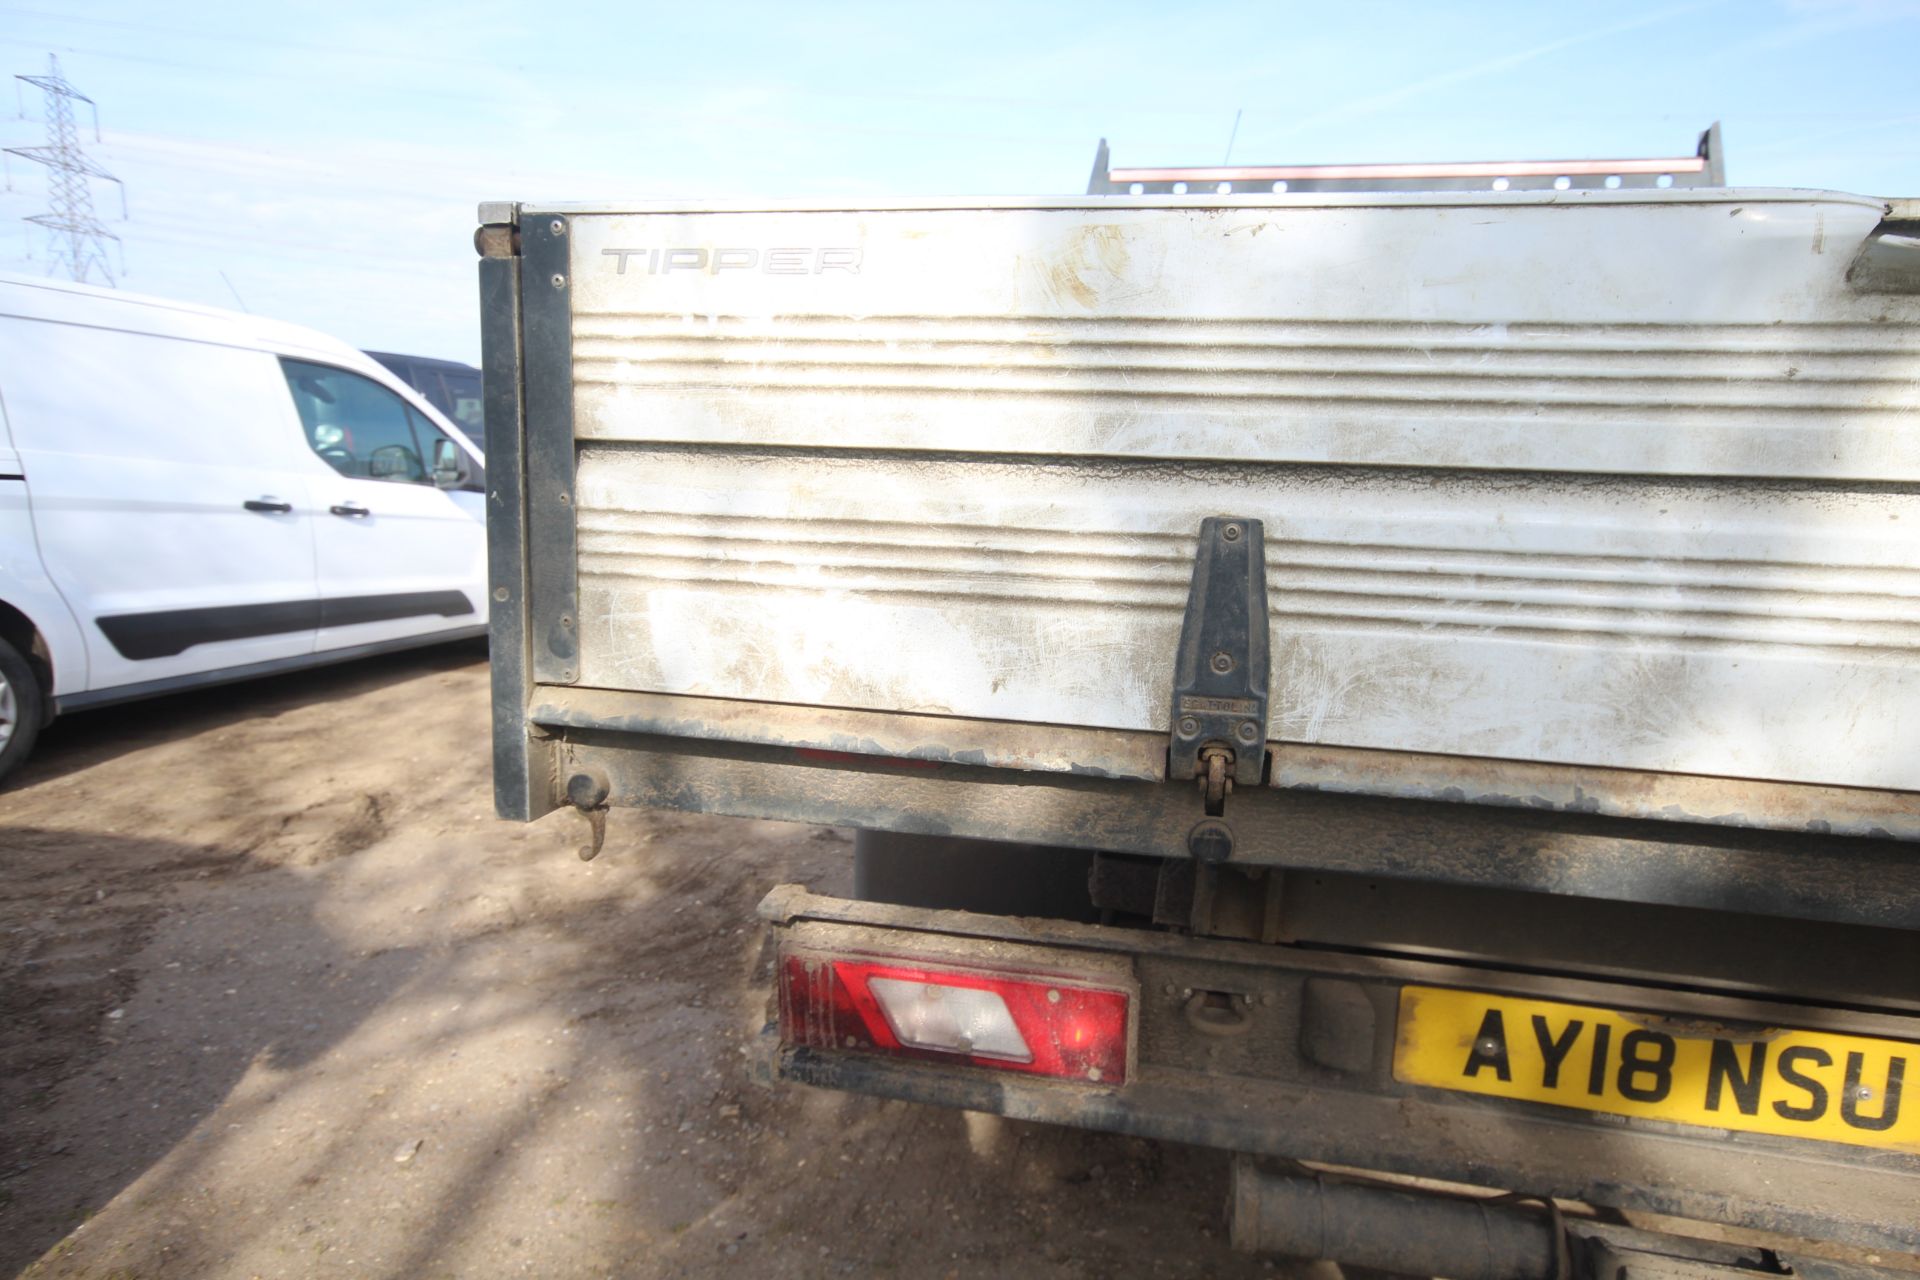 Ford Transit 350 2L diesel manual drop-side tipper. Registration AY18 NSU. Date of first - Image 21 of 64